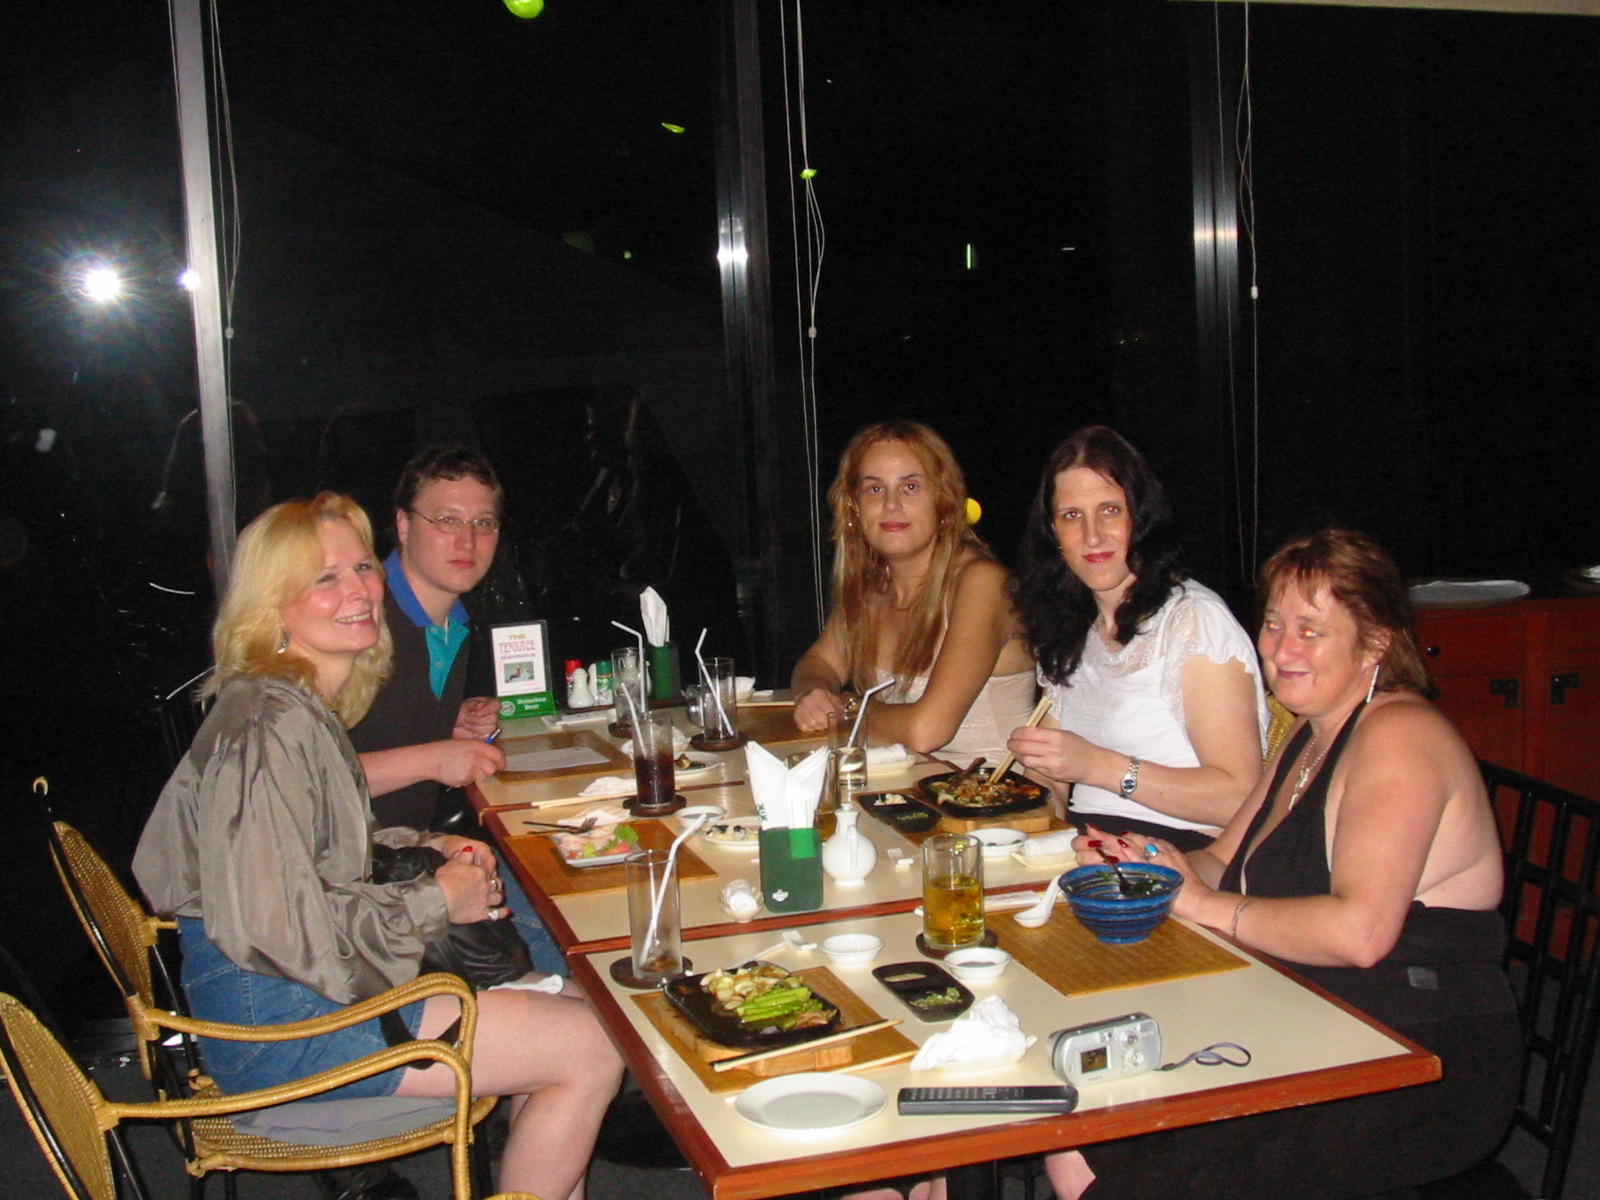 My first visit to a Japanese Restaurant. From the left - Brandy, Luke, Ulli, myself and Kazzy